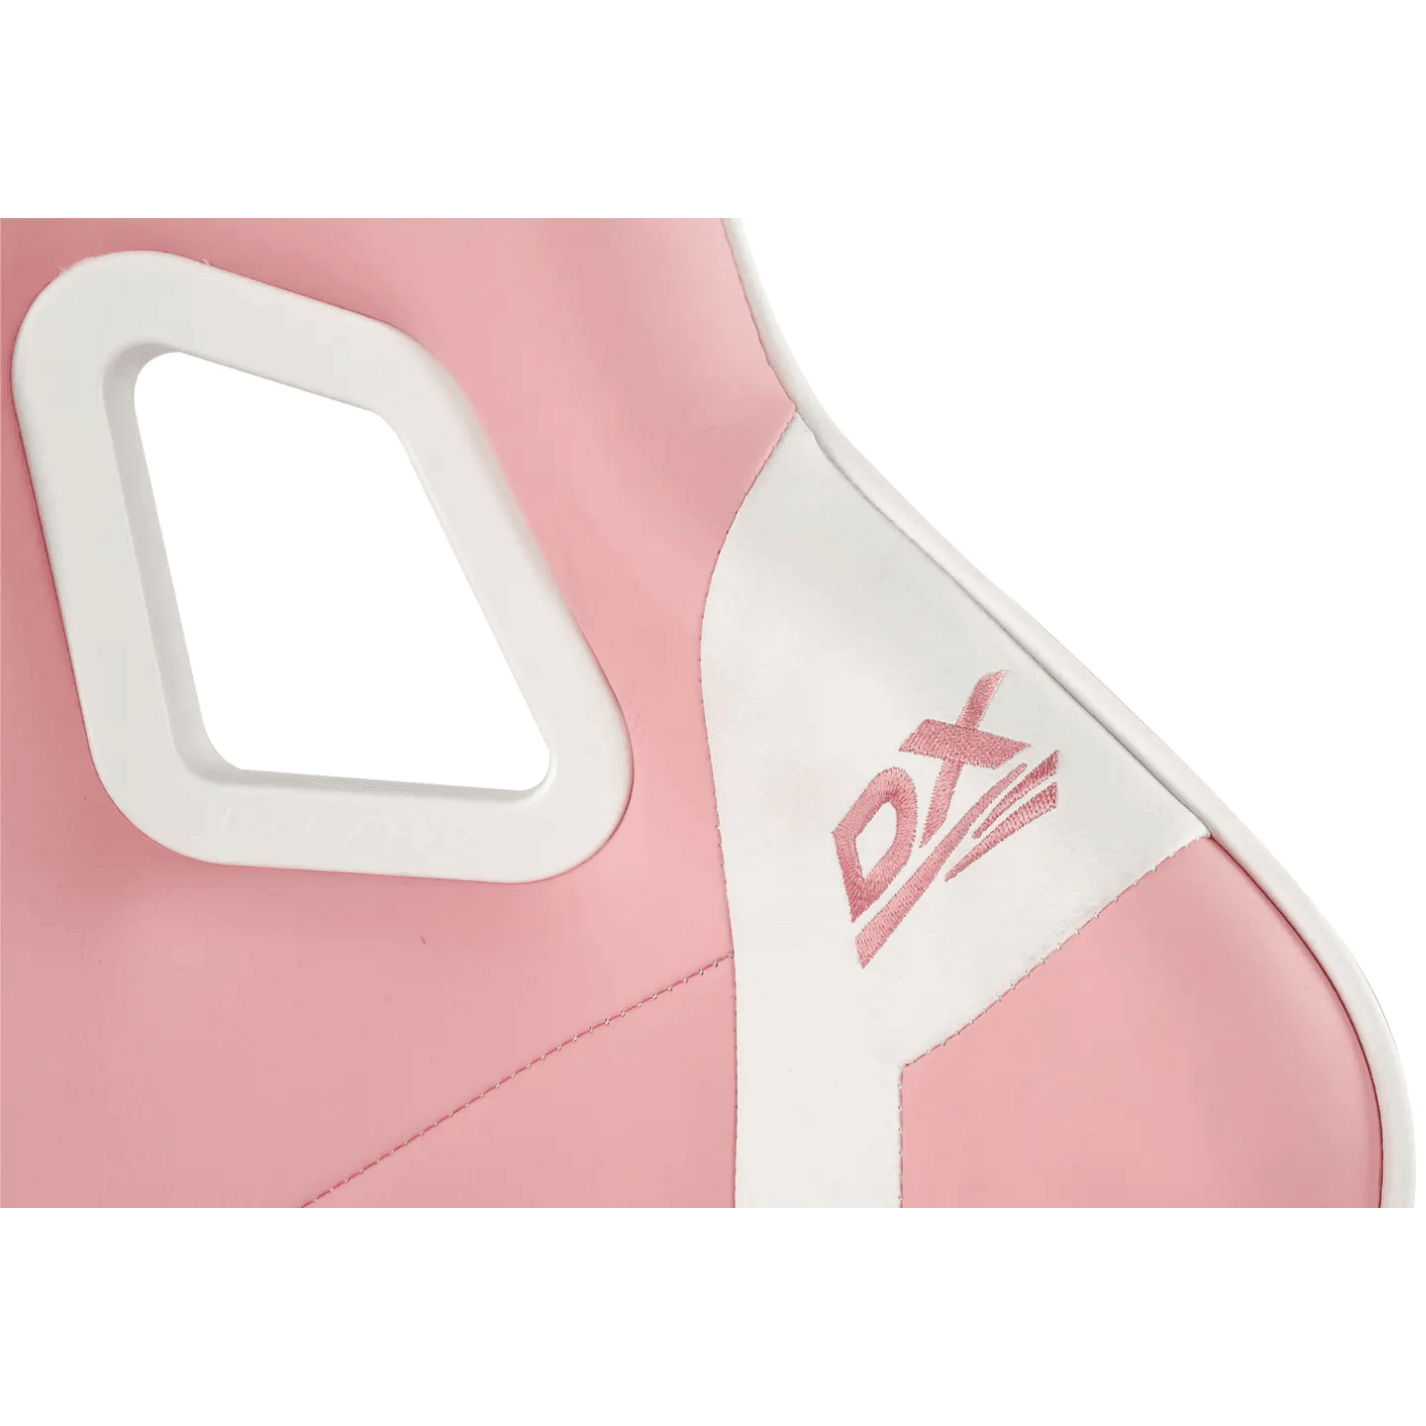 DXRacer Prince D6000 Pink Gaming Chair